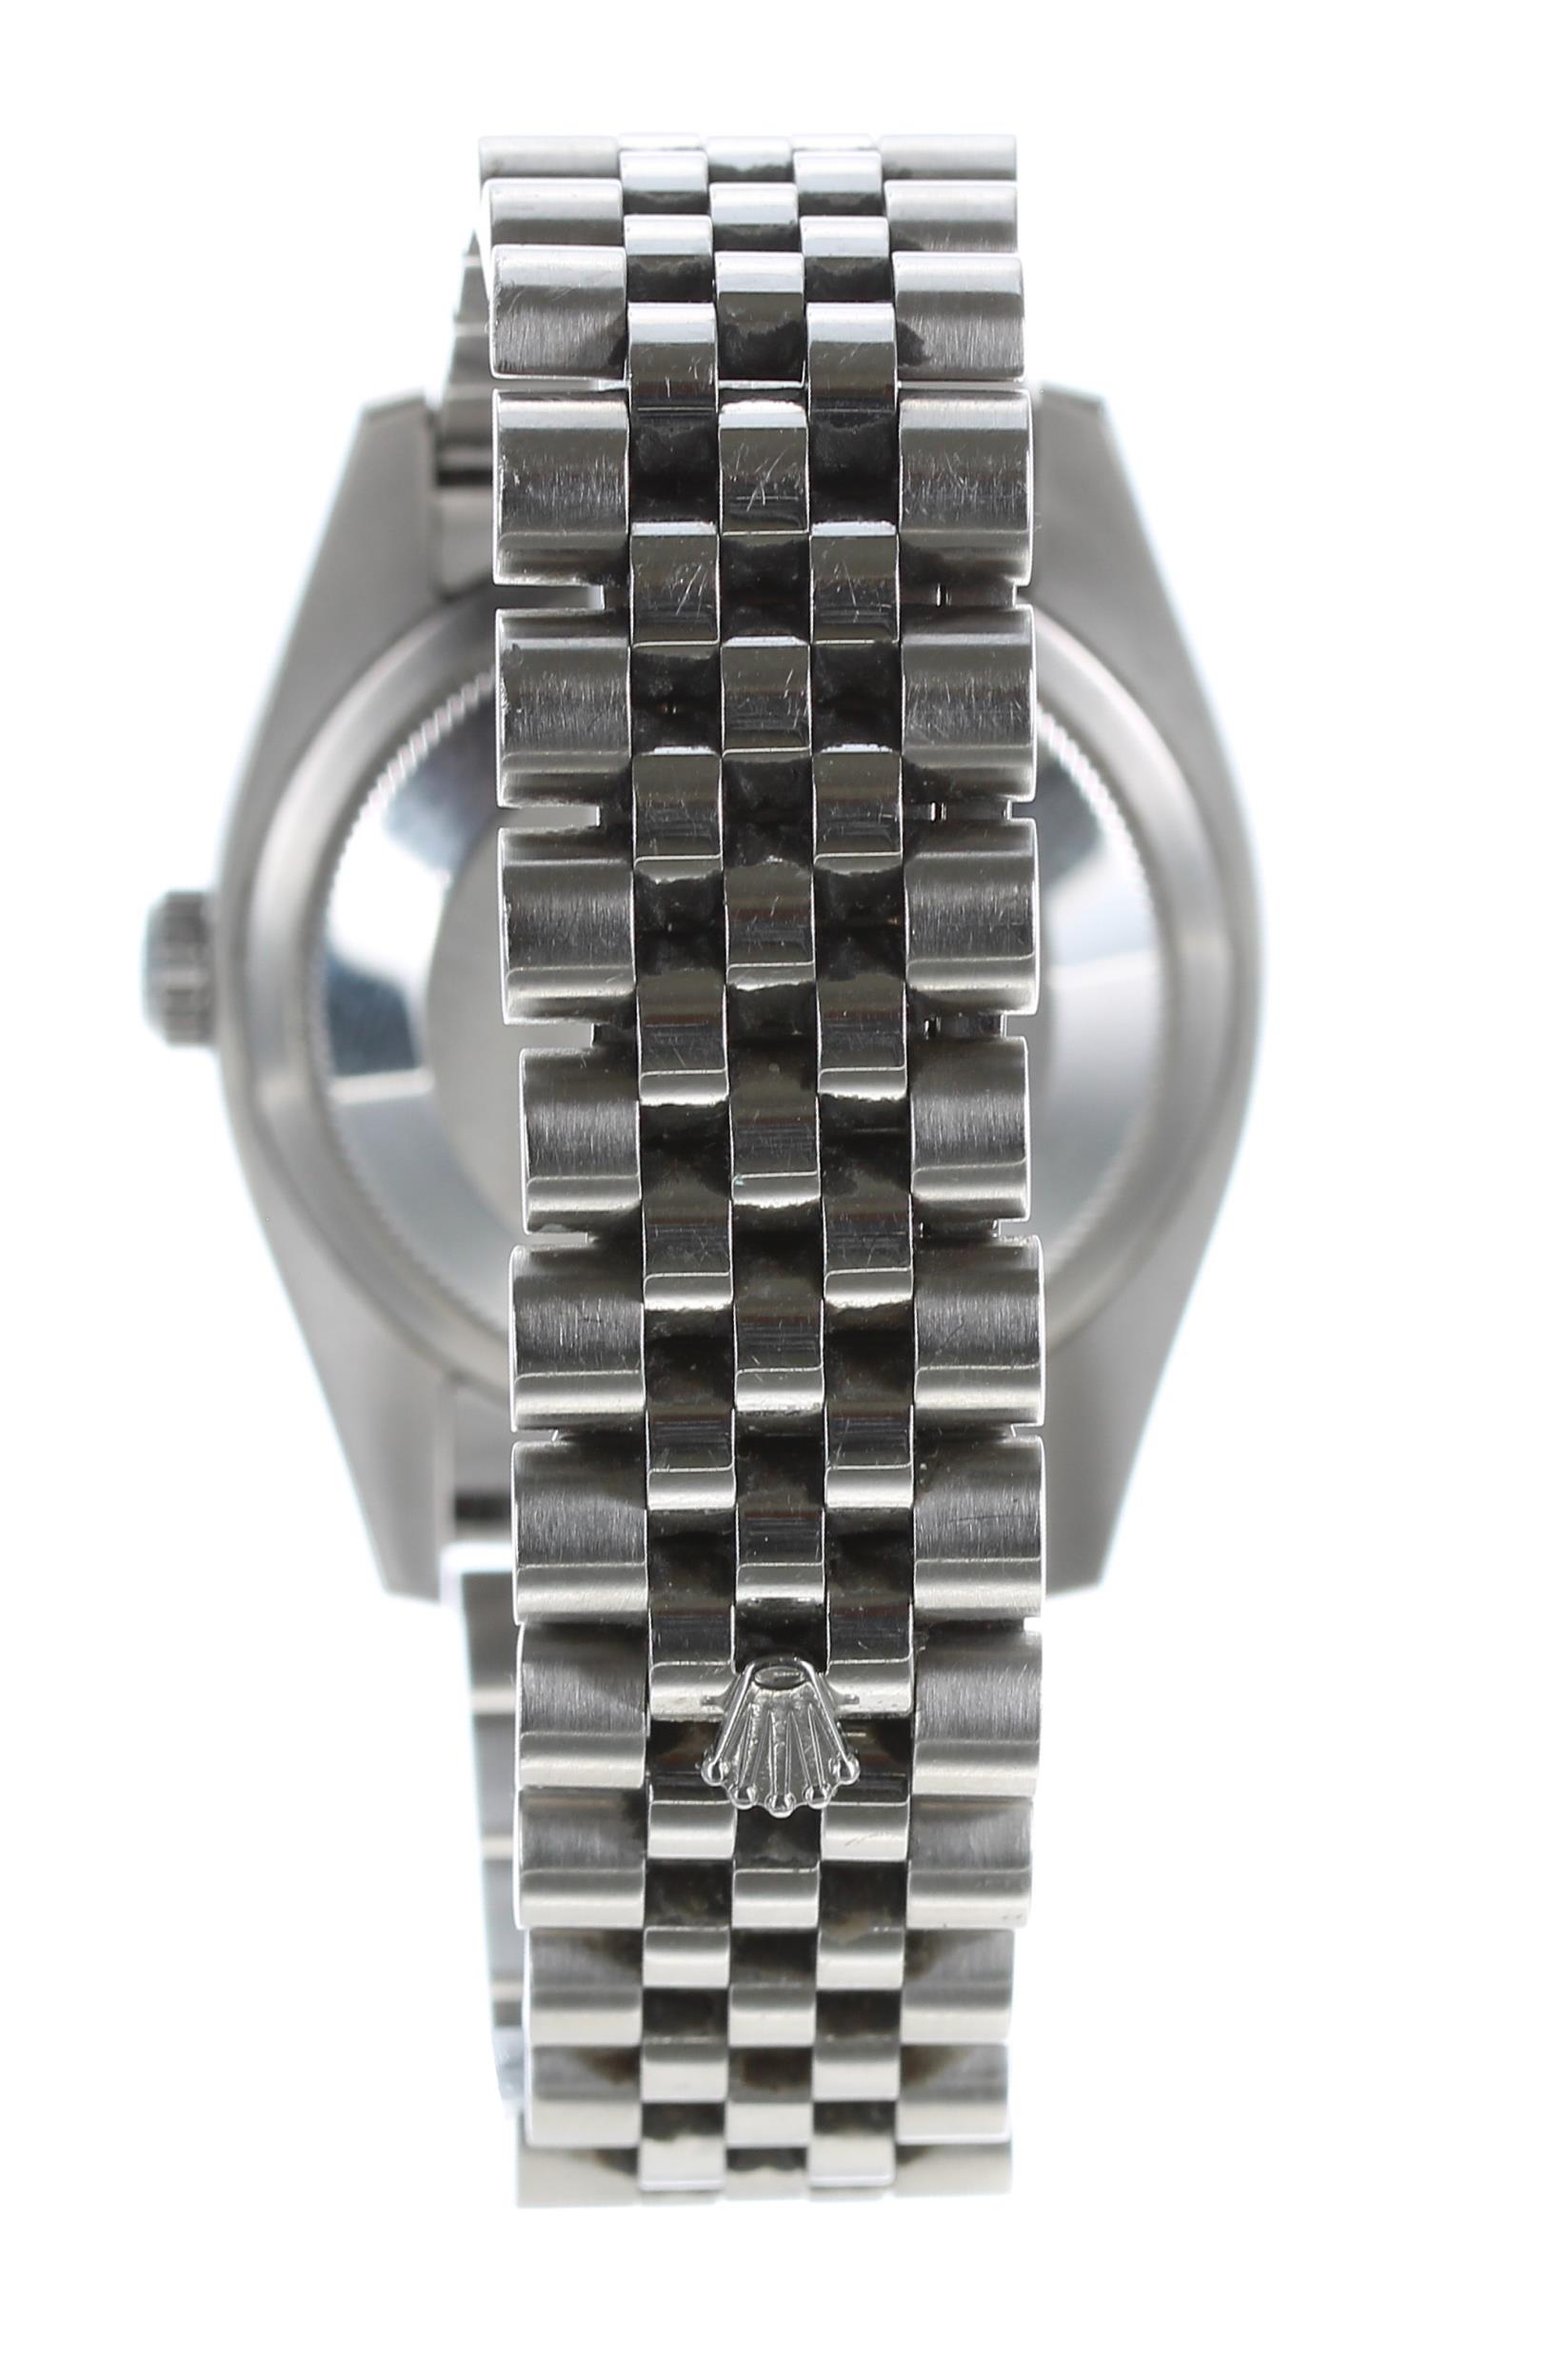 Rolex Oyster Perpetual Datejust stainless steel gentleman's bracelet watch, reference no. 116200, - Image 5 of 6